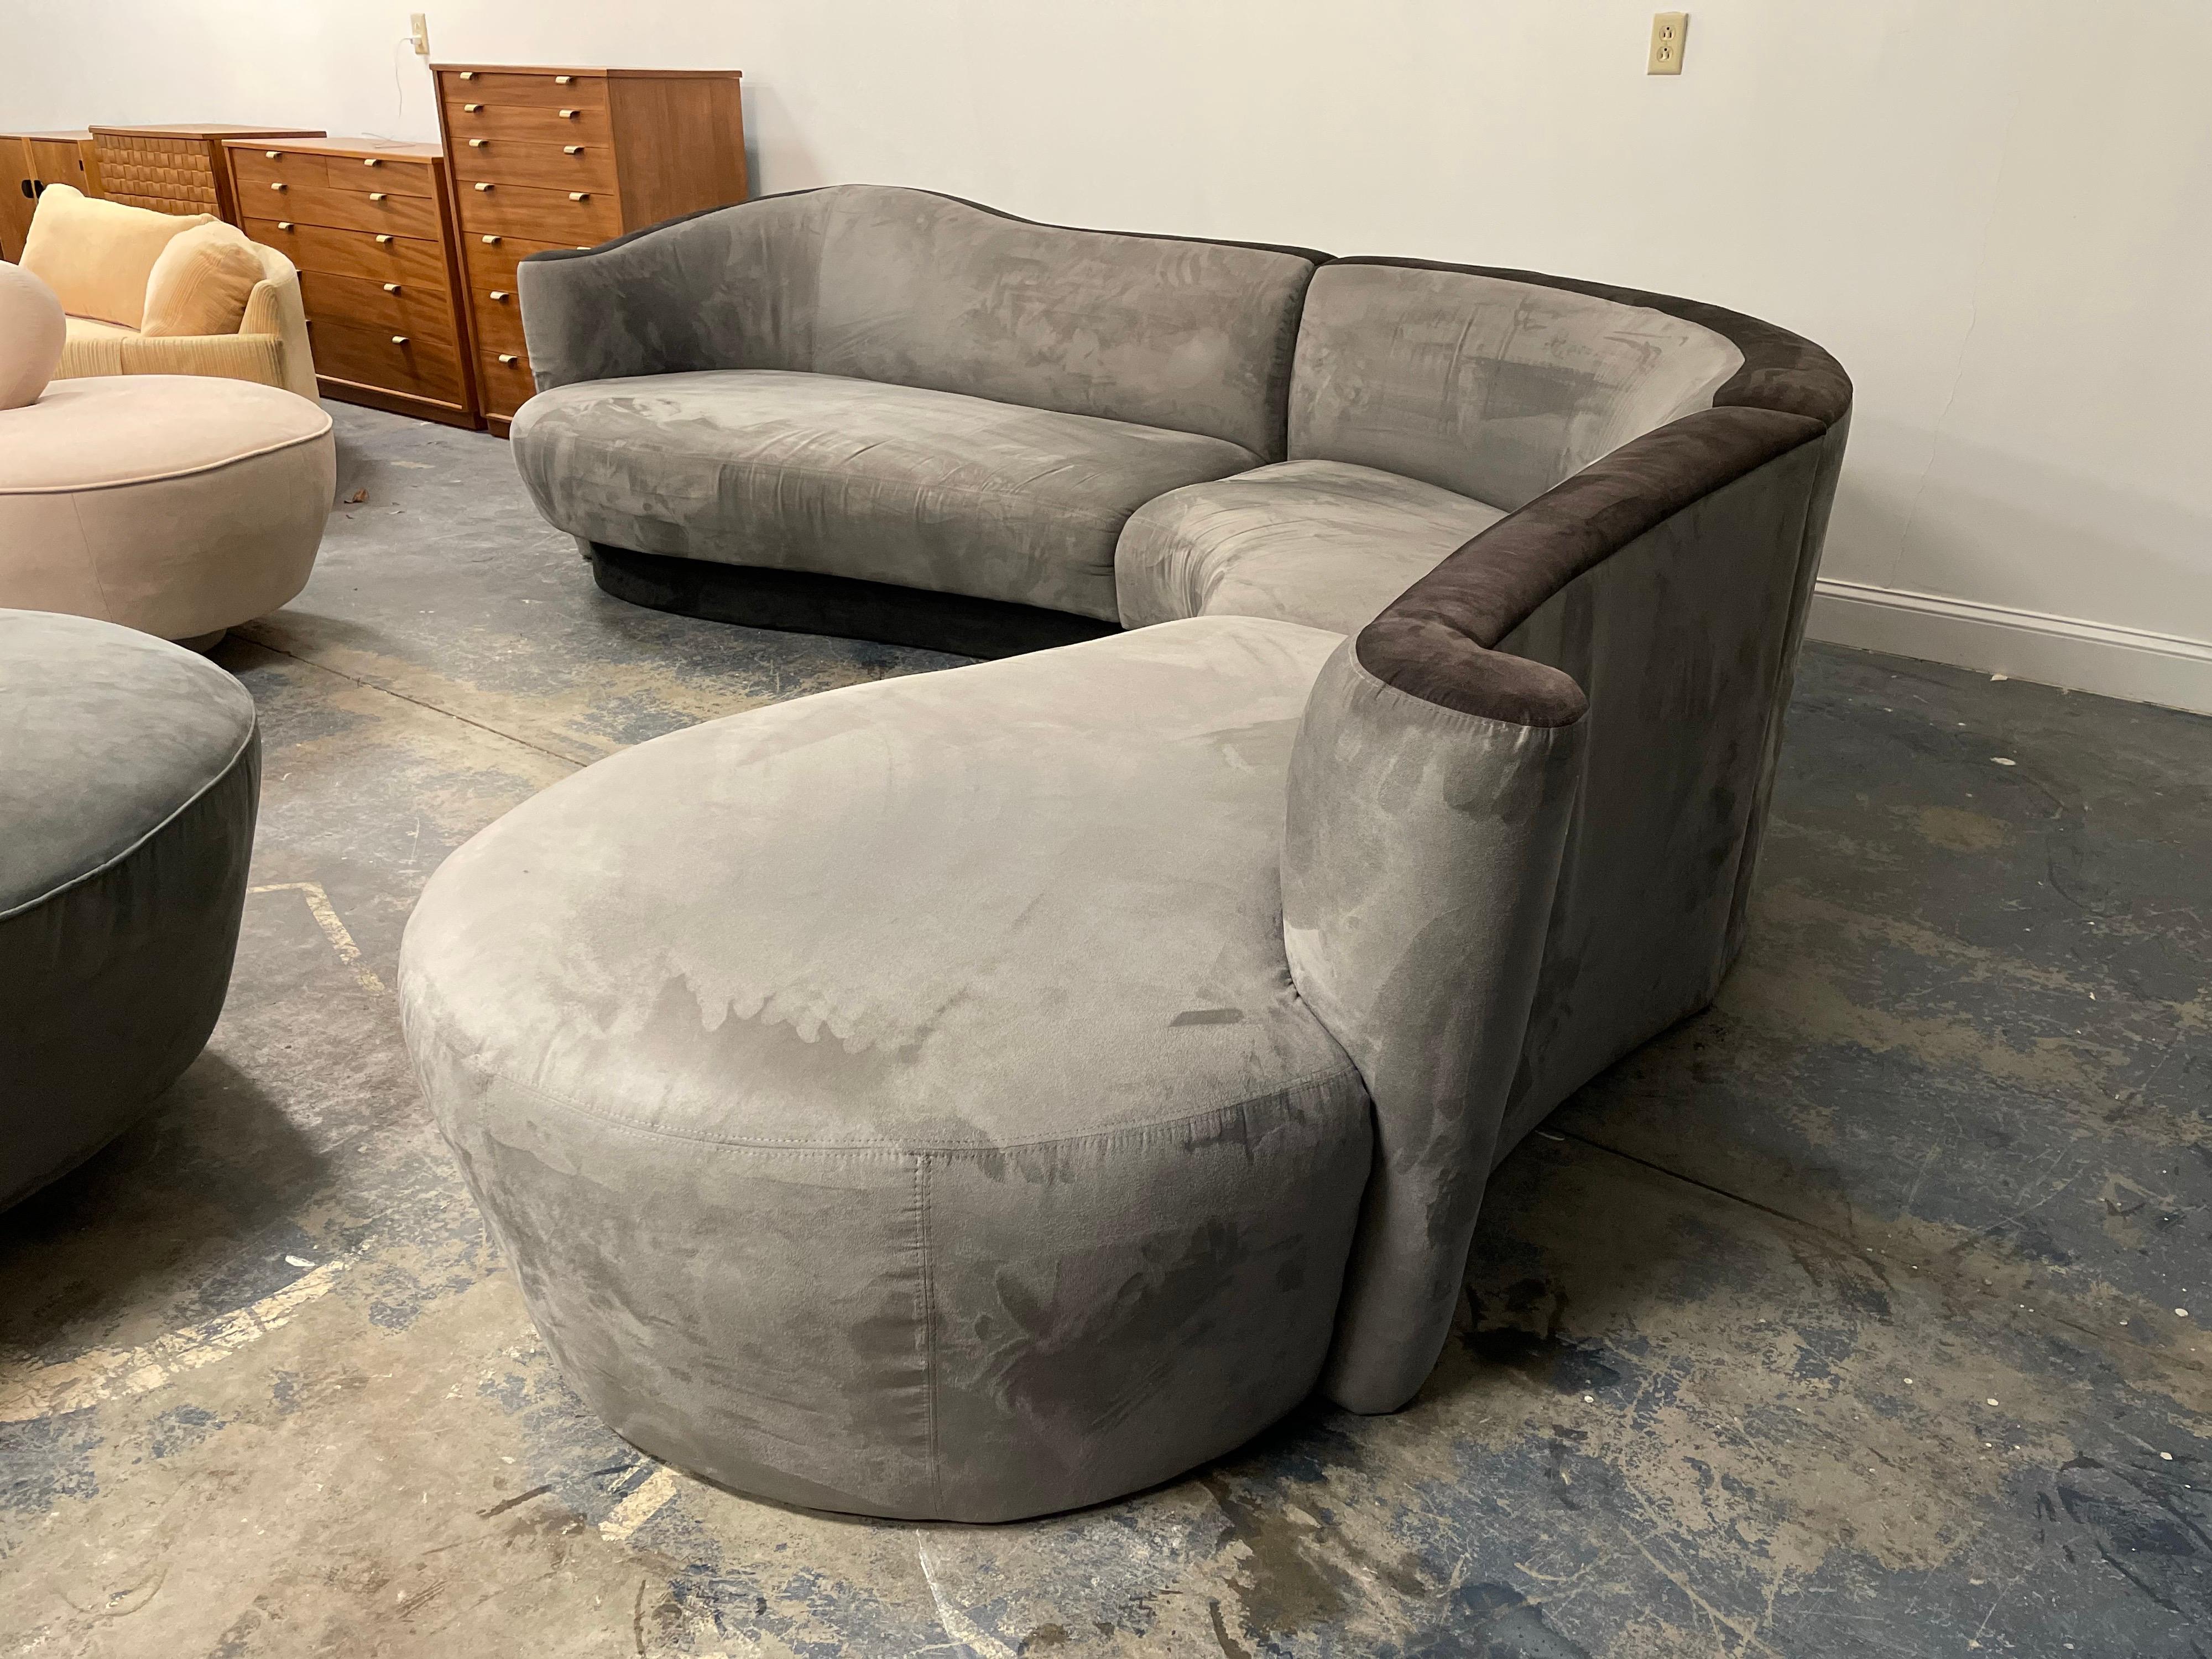 Stunning three piece sectional by Weiman Preview. Original grey/ black contrasting ultra suede is in wonderful condition with exceptionally minor wear. Organic freeform shape blends well with many interiors. 

Measures: 122